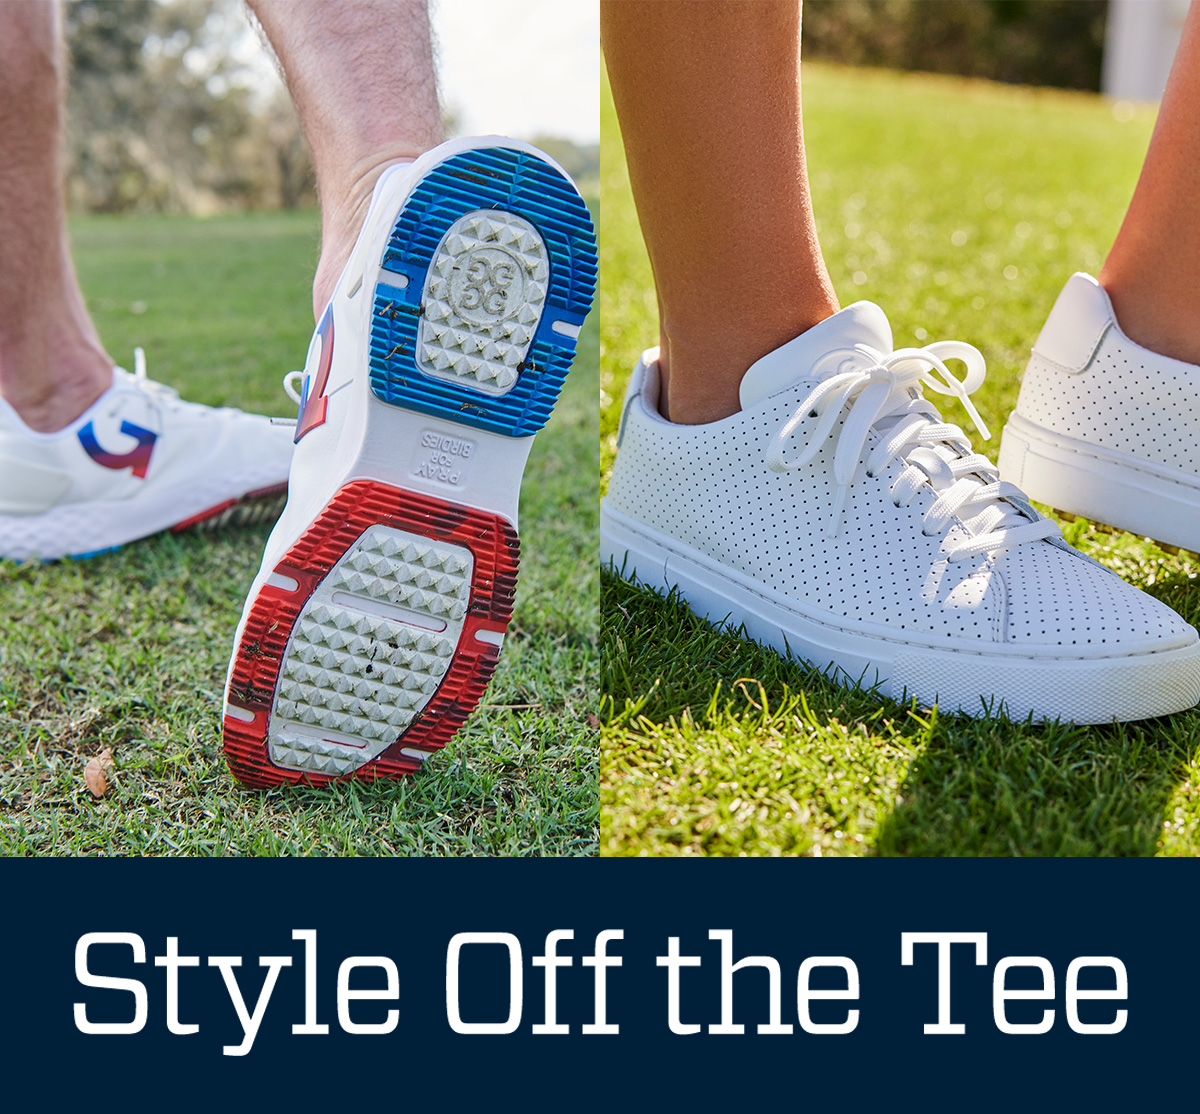  Style off the tee.